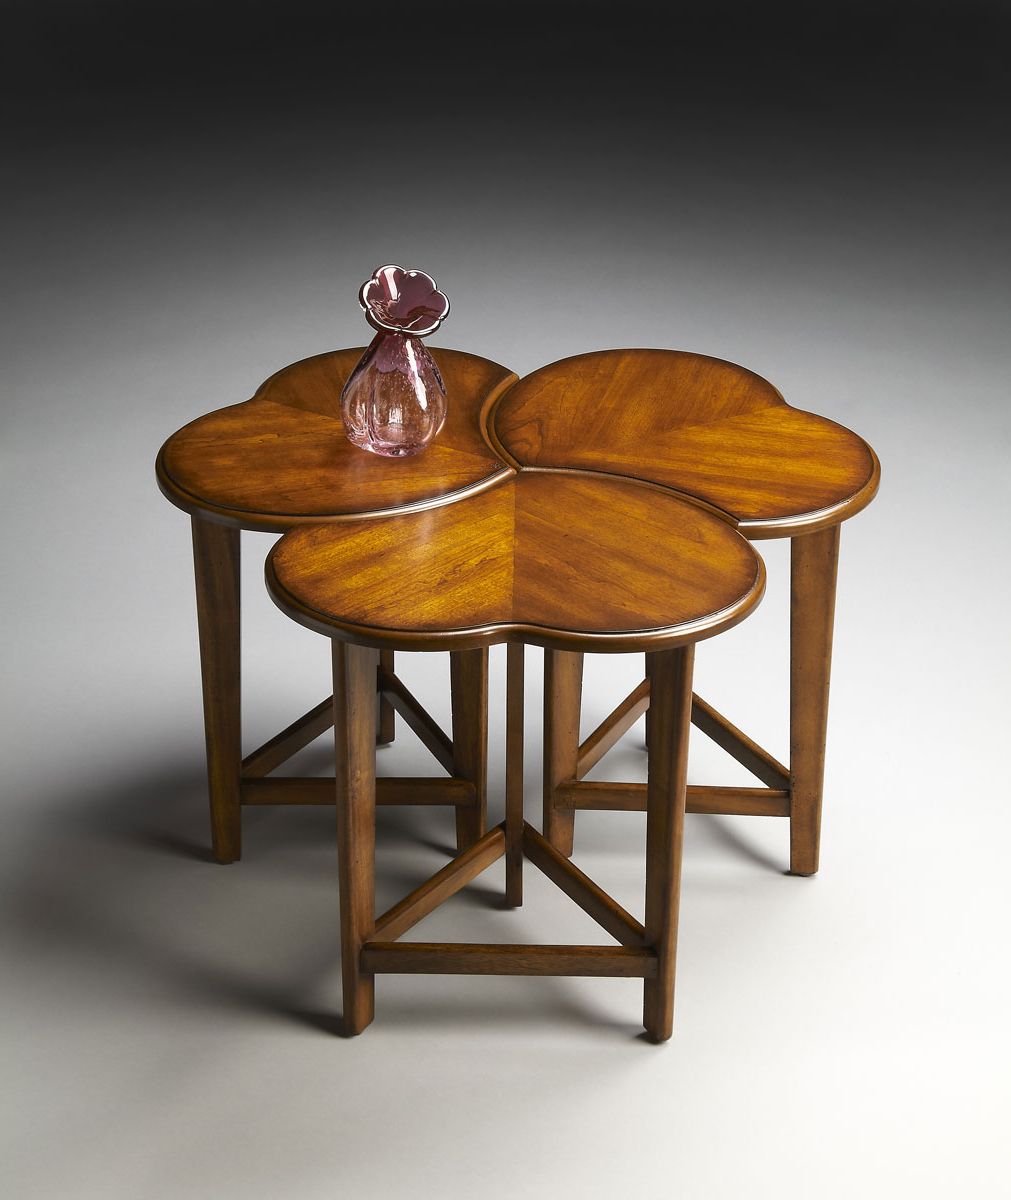 Best And Newest Nesting Cocktail Tables Throughout Butler 2224011 Nesting Cocktail Tables – Antique Cherry Bt 2224011 At (View 7 of 10)